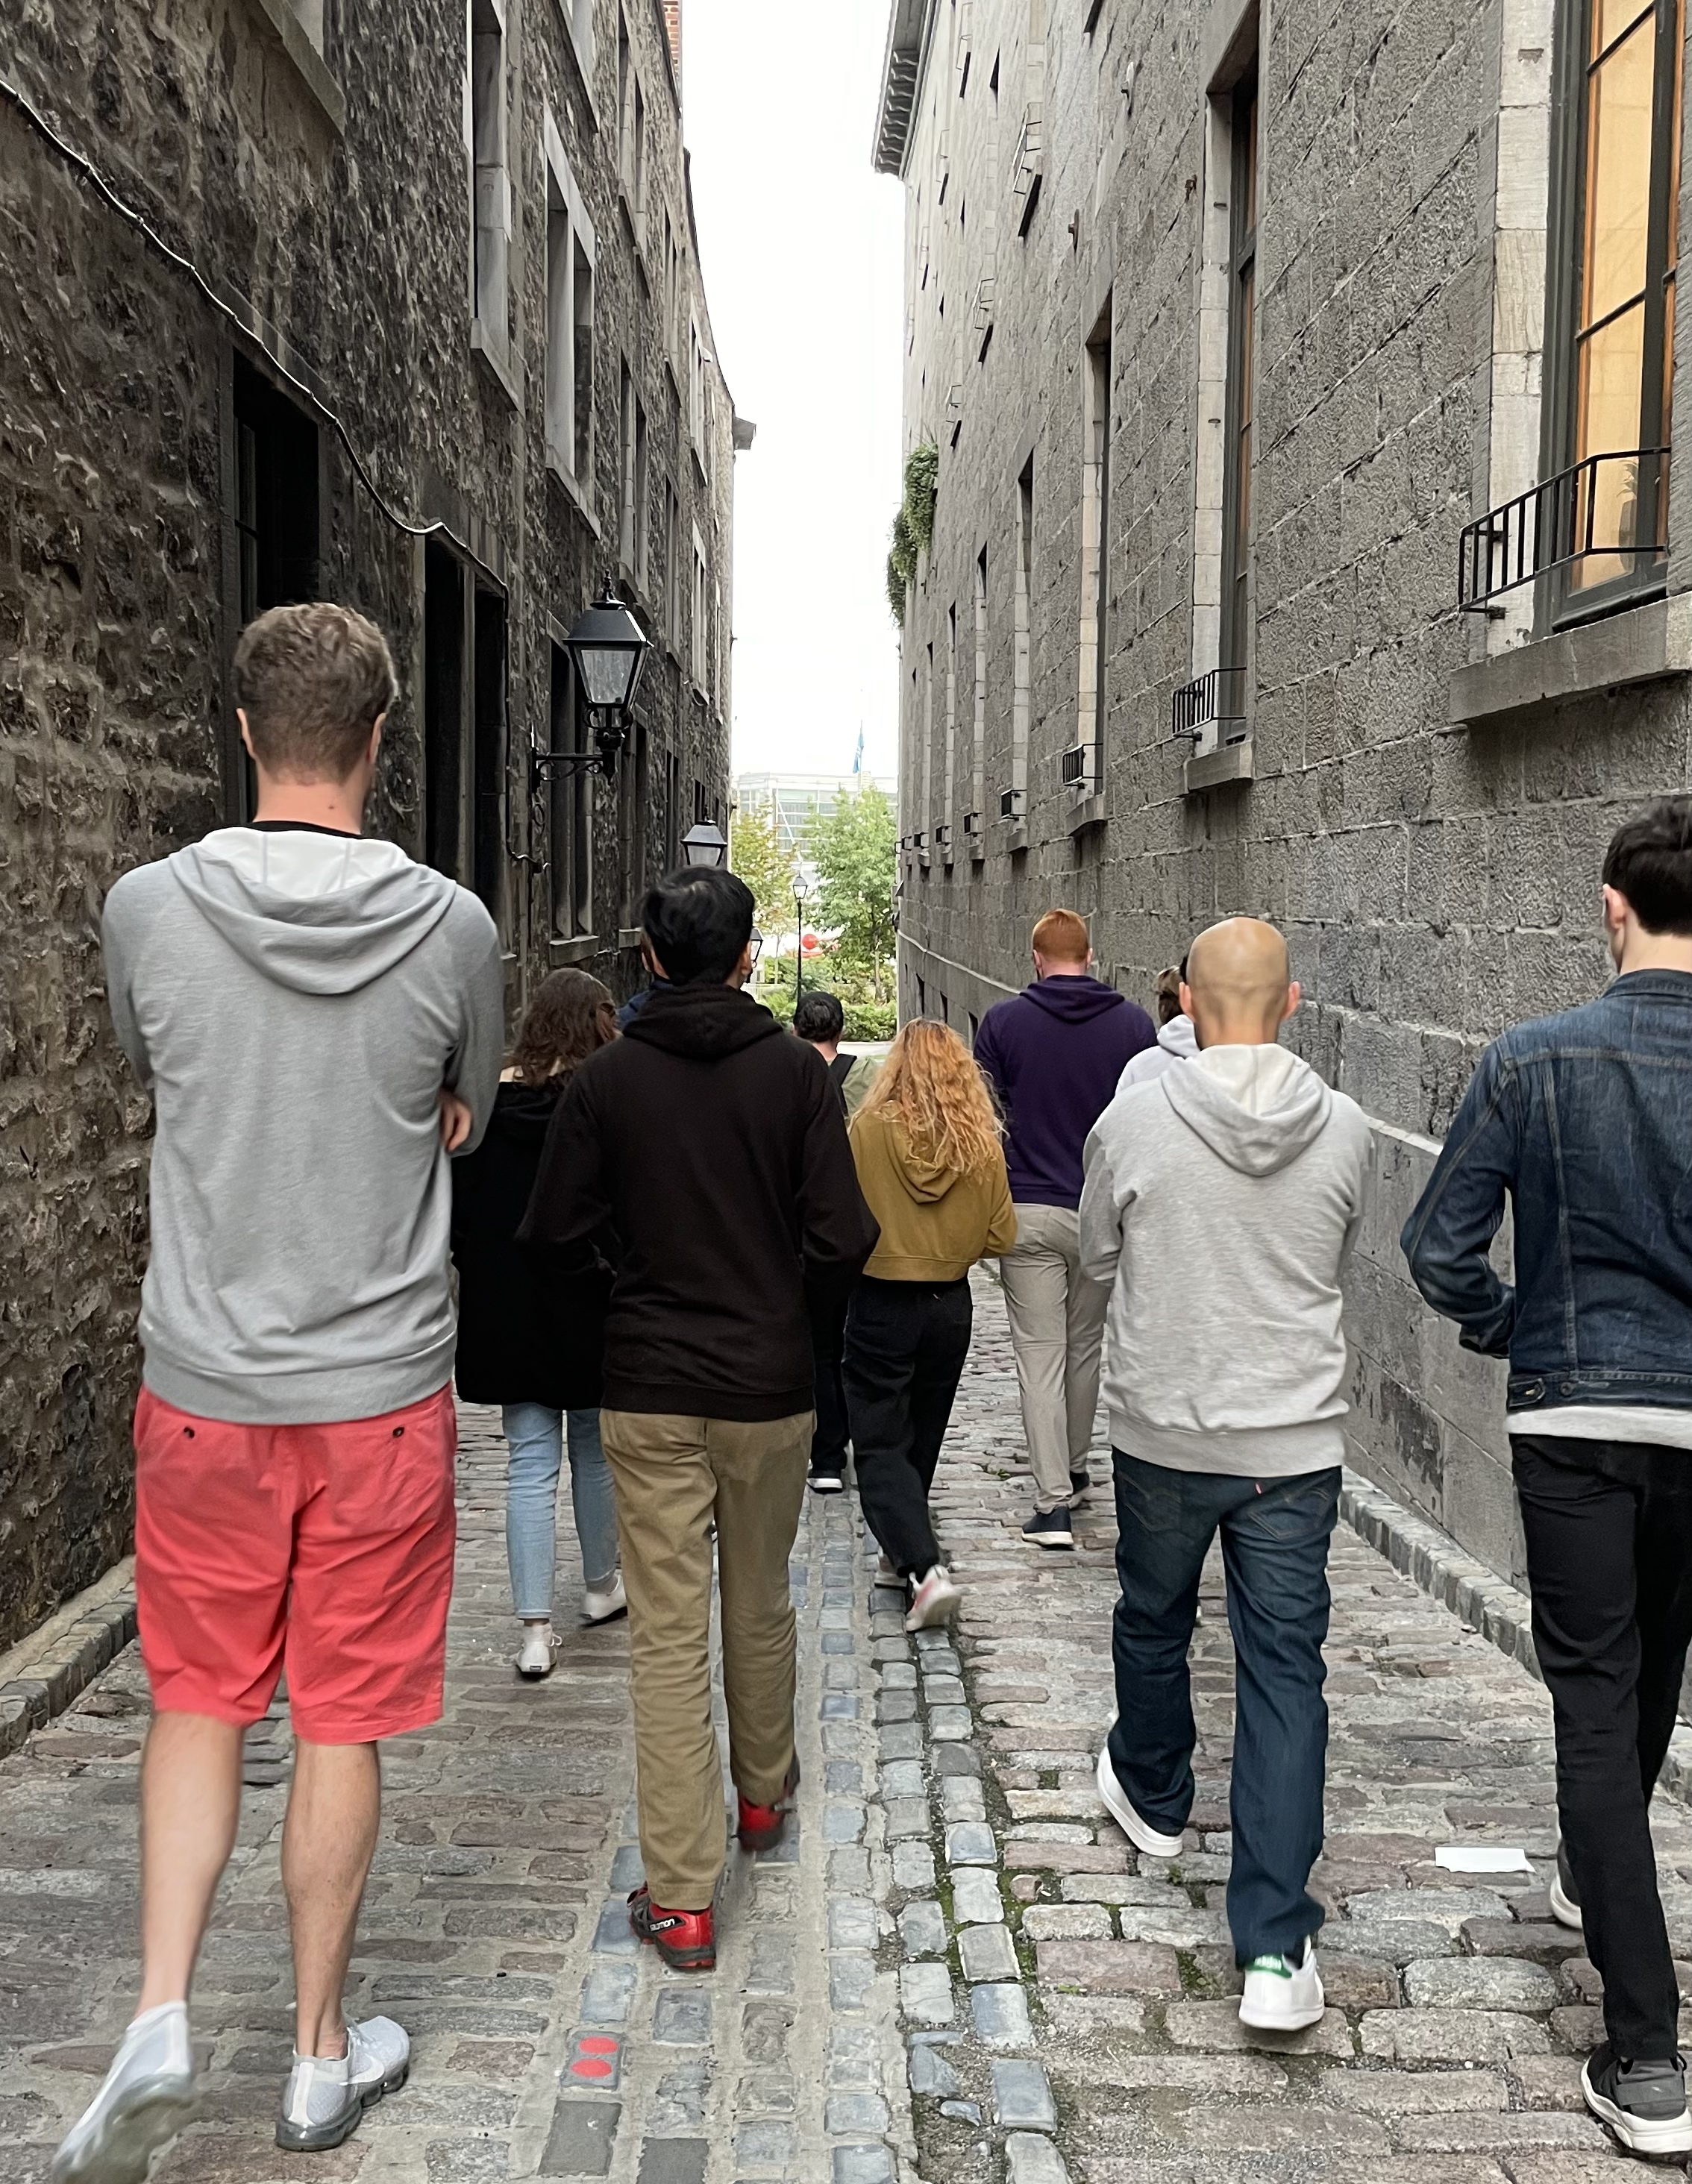 The team on our walking tour of Old Montreal.